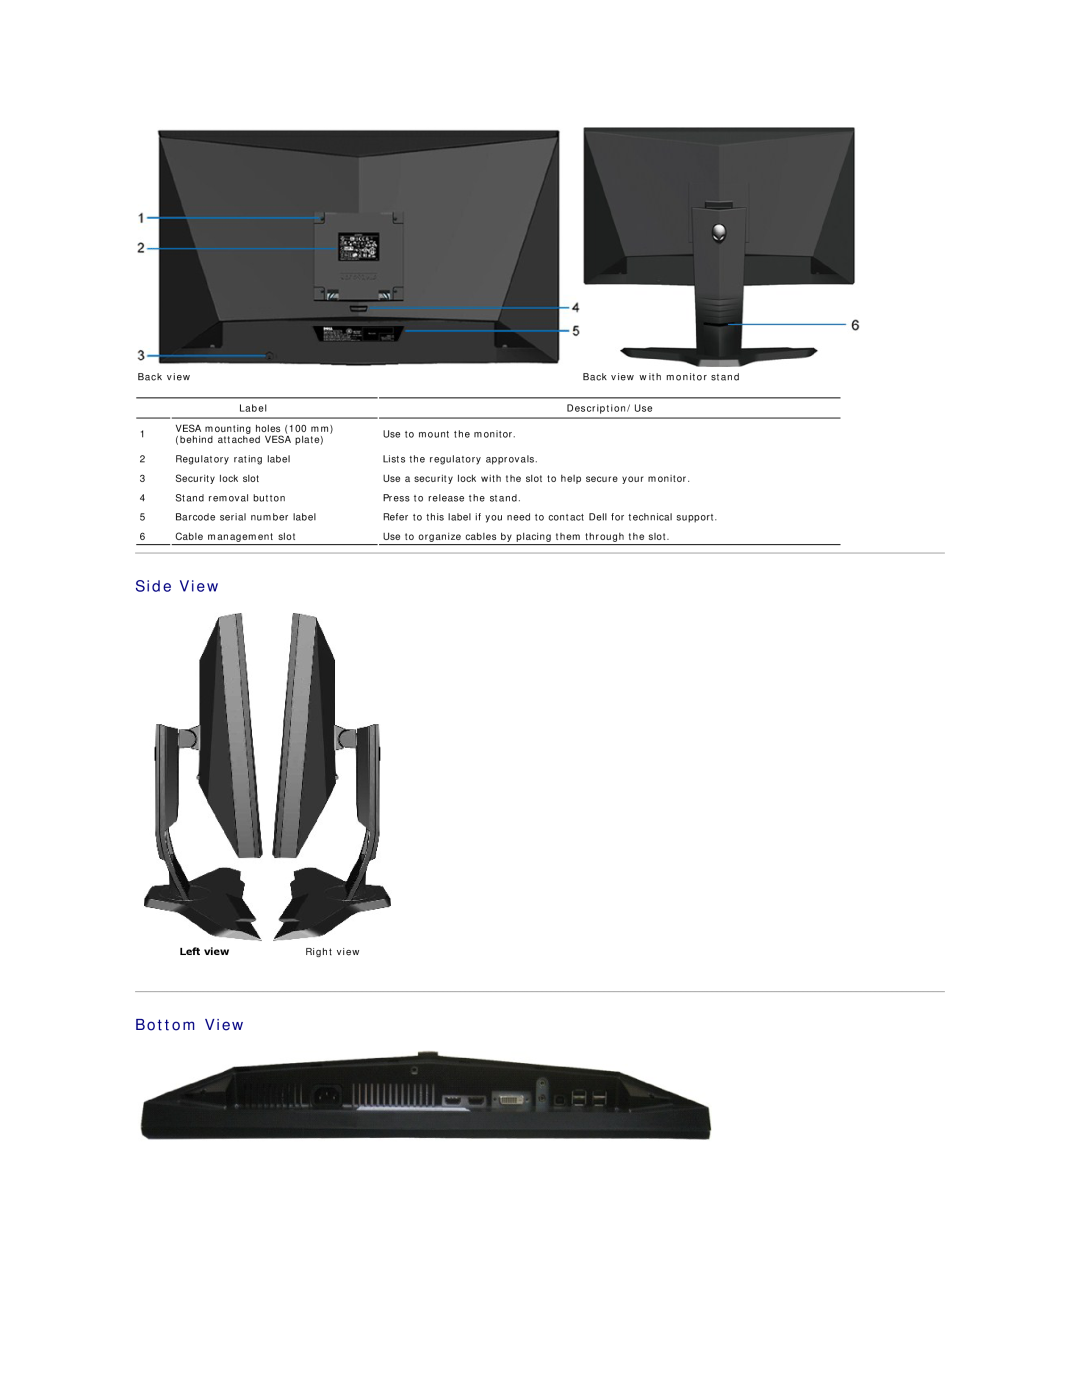 Dell AW2210T Side View, Bottom View, Back view with monitor stand, Label, Description/Use, Left view, Right view 